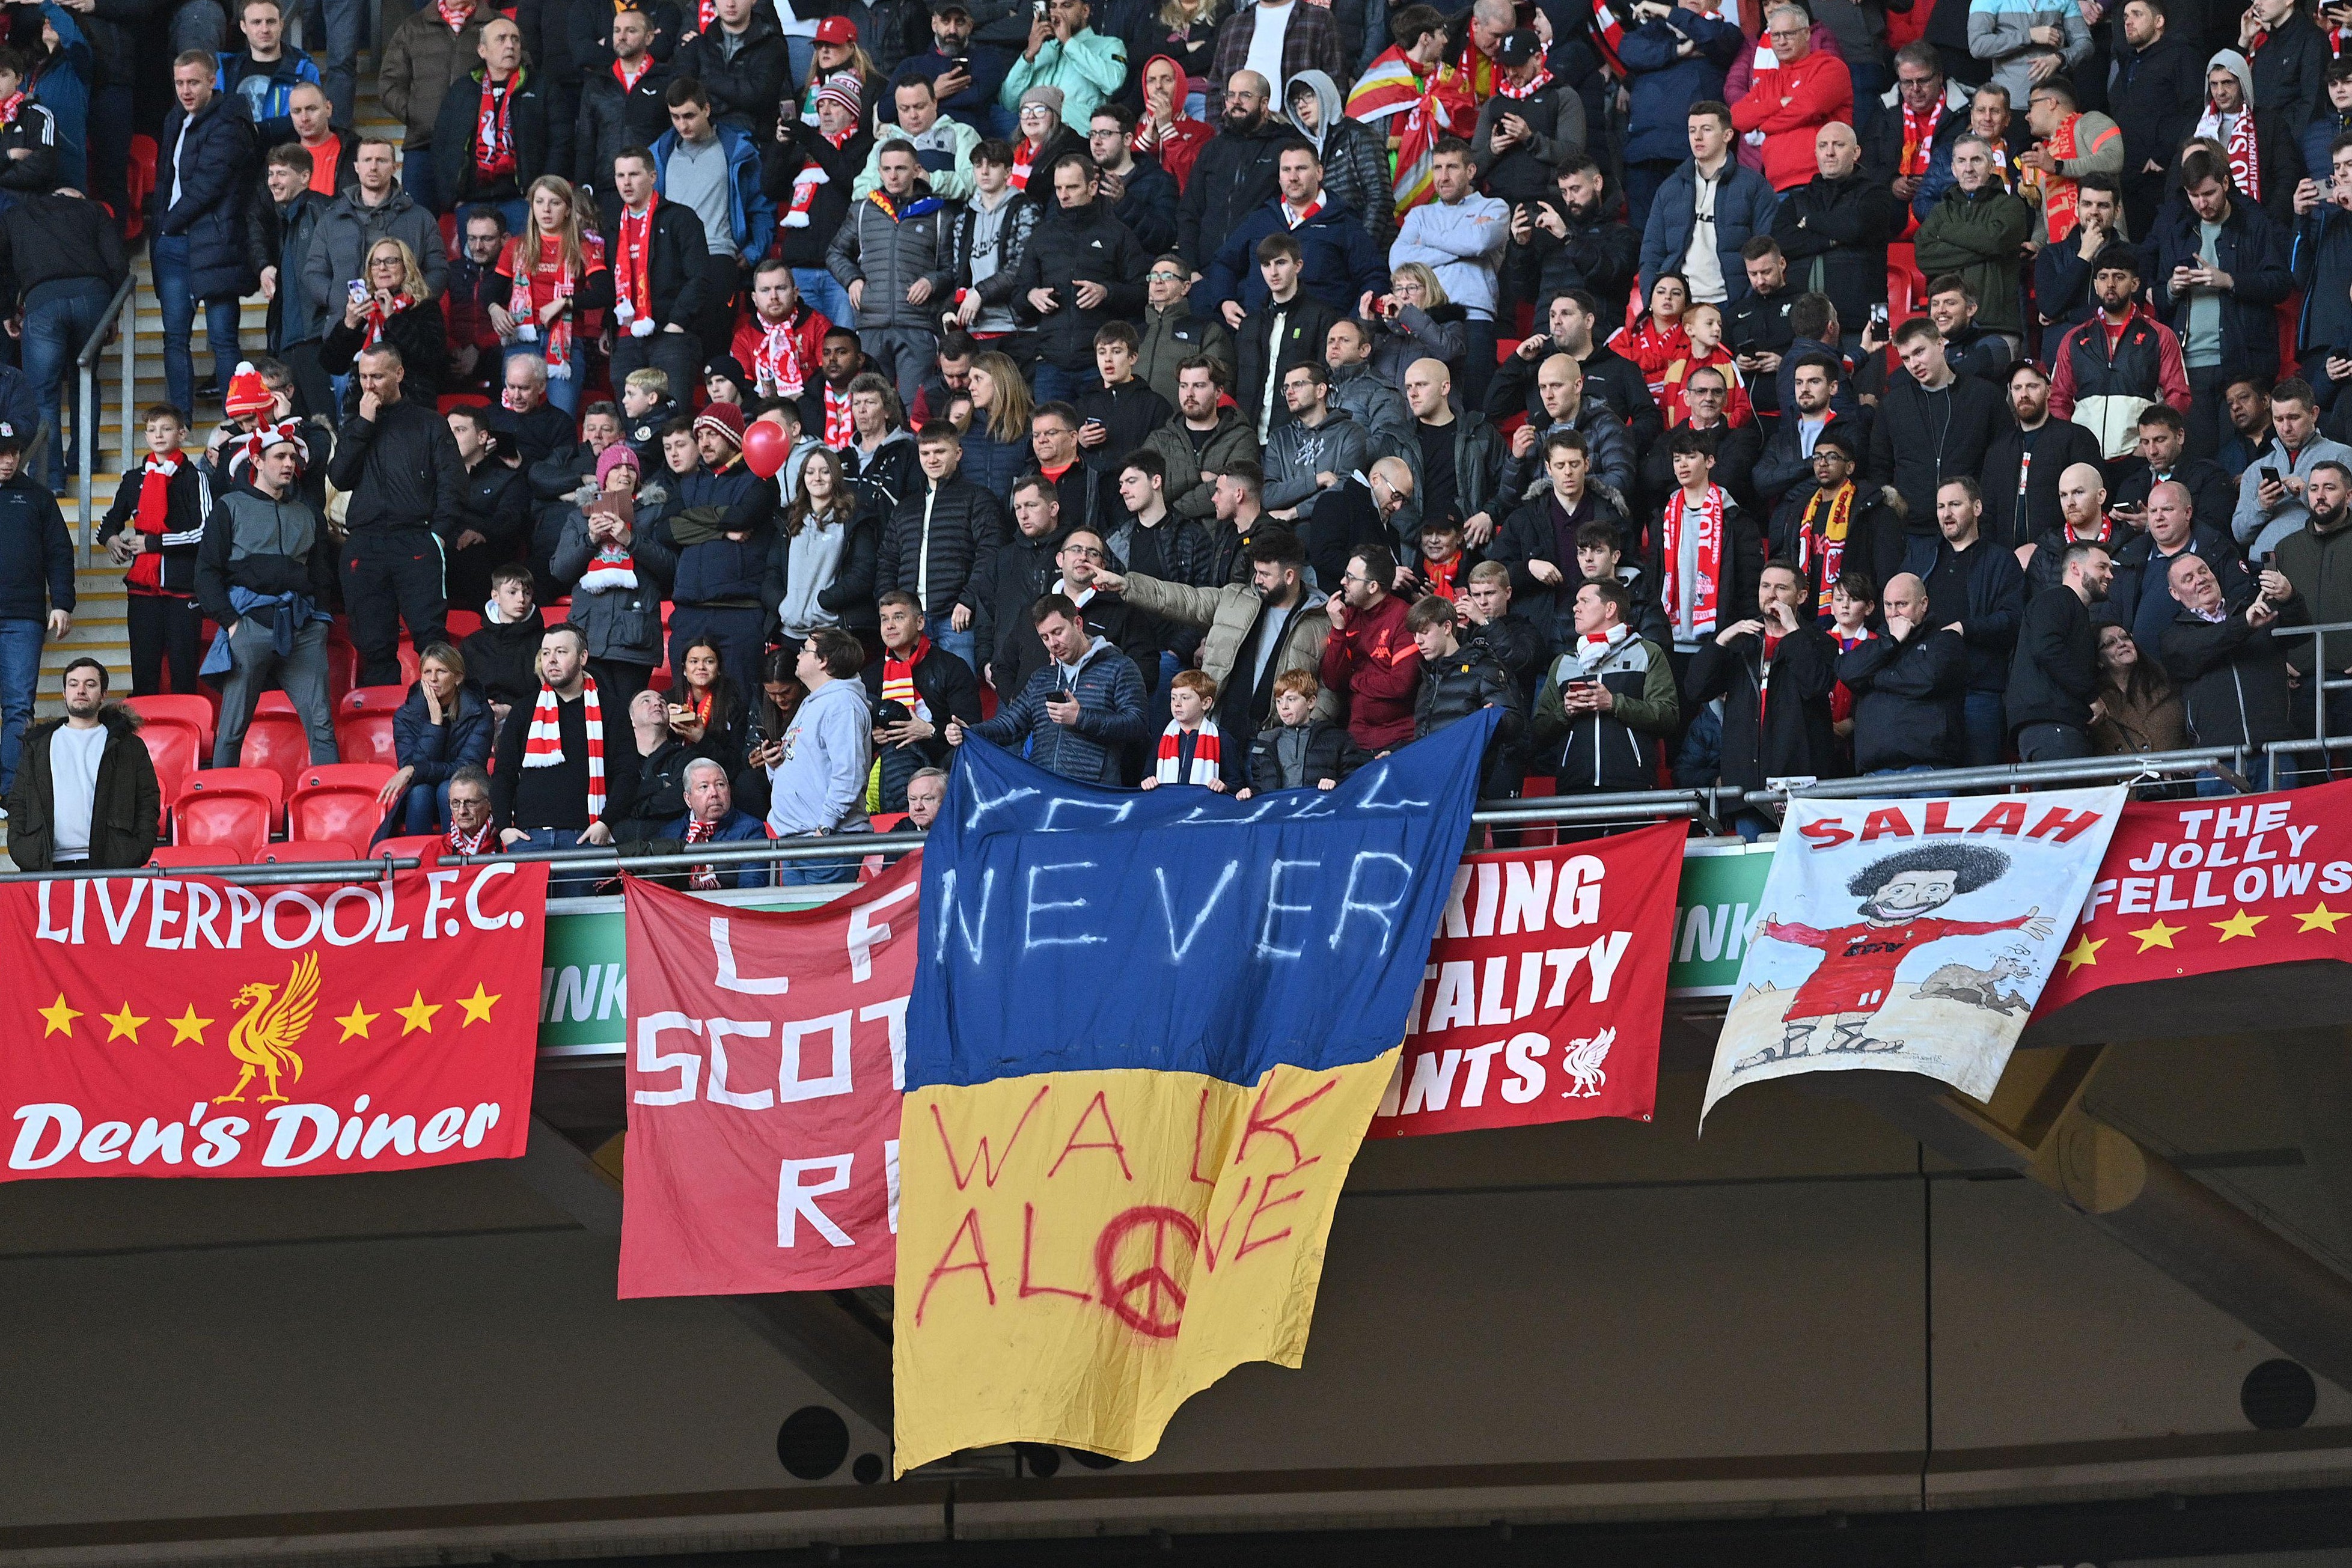 Liverpool supporters hold up a Ukrainian flag with the team’s motto “You’ll Never Walk Alone” written on it, a peace sign illustrated in the "o" of "Alone," amid general signs supporting Liverpool FC and team star Mo Salah.